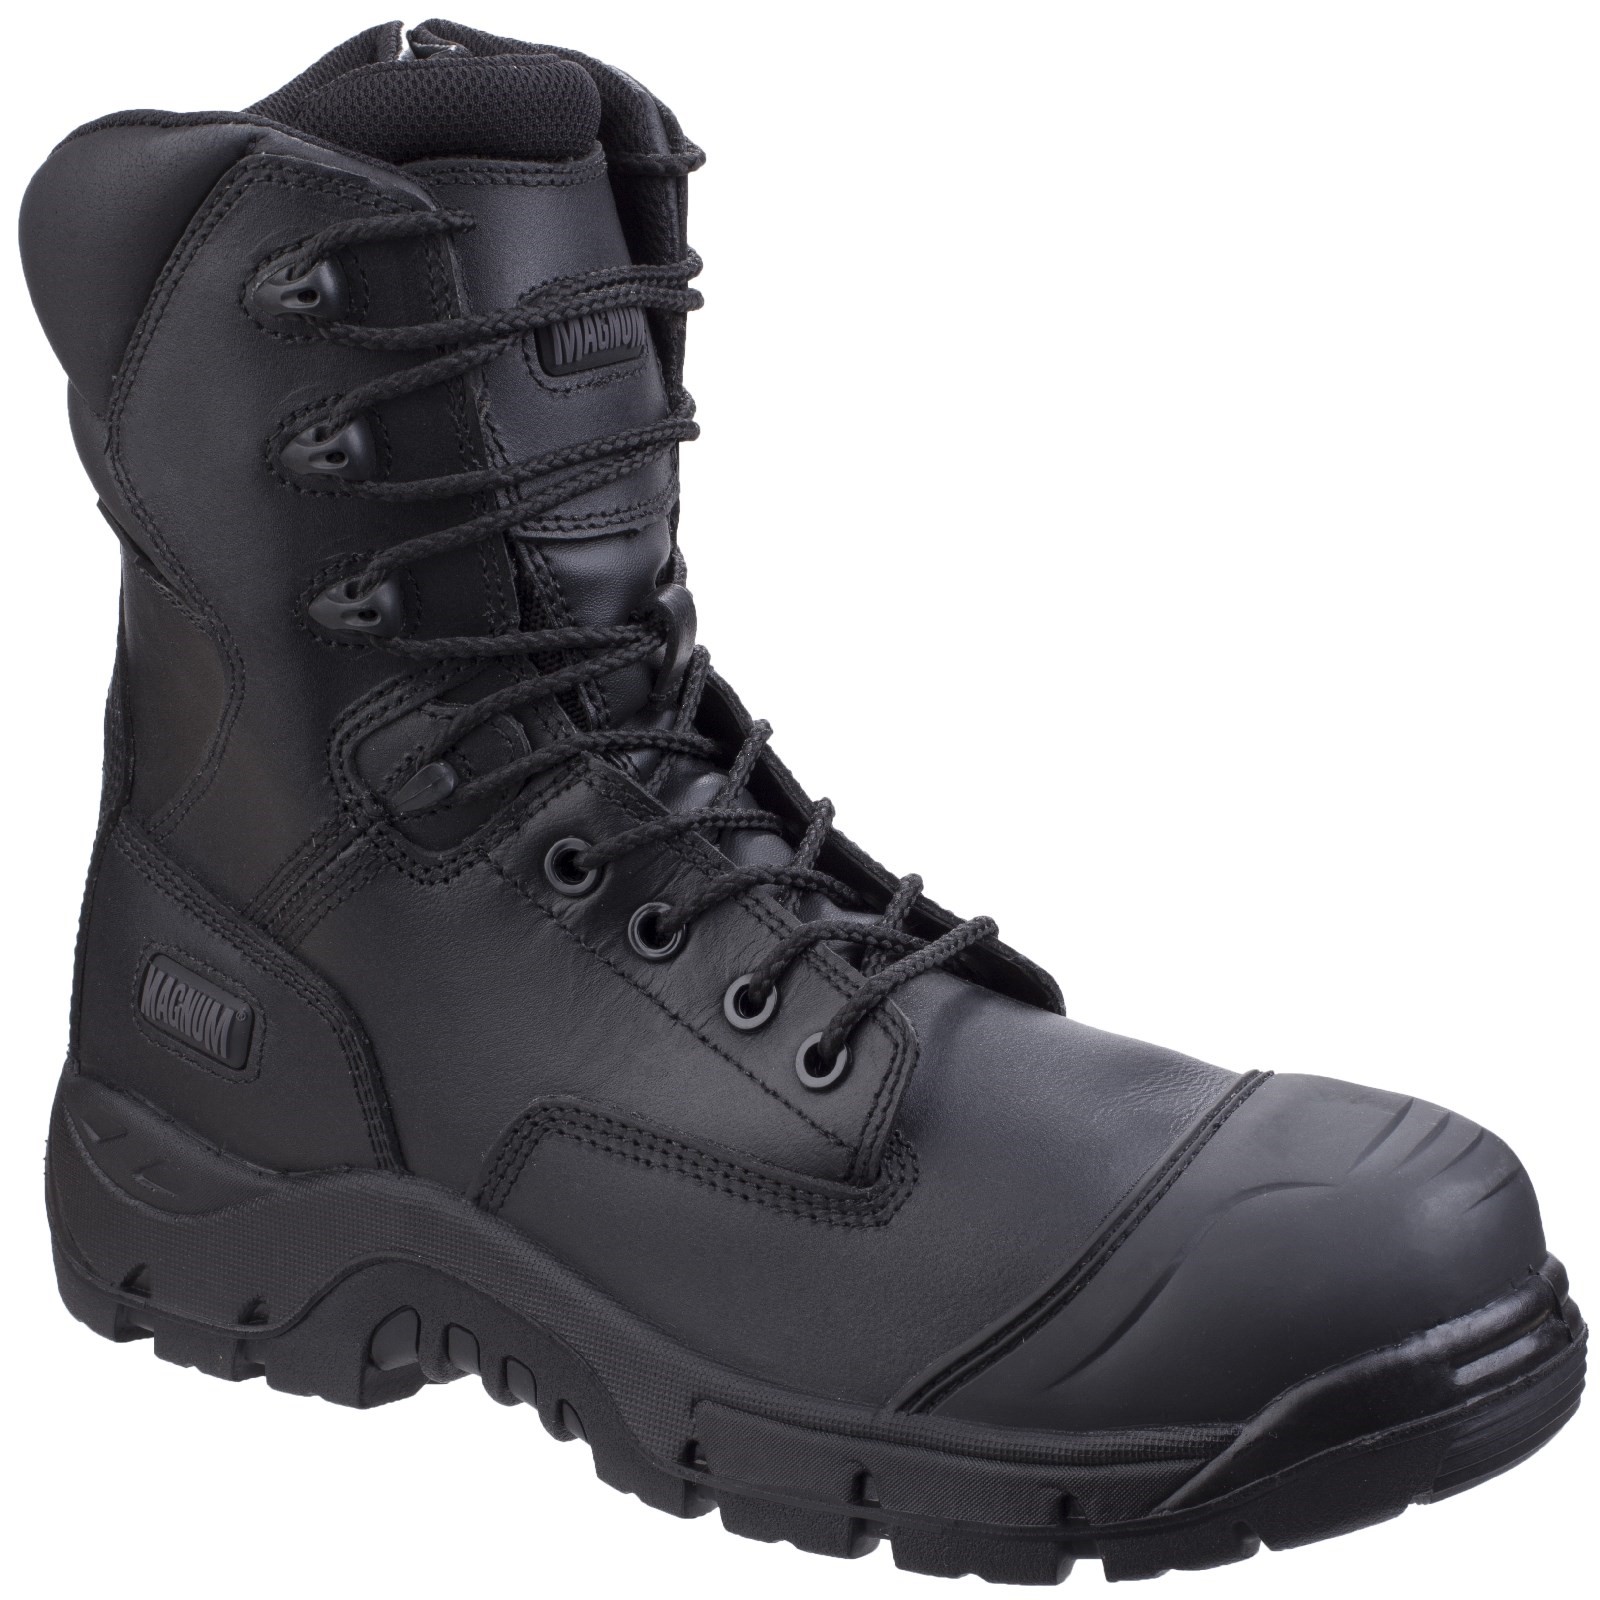 Rigmaster Side-Zip Uniform Safety Boot